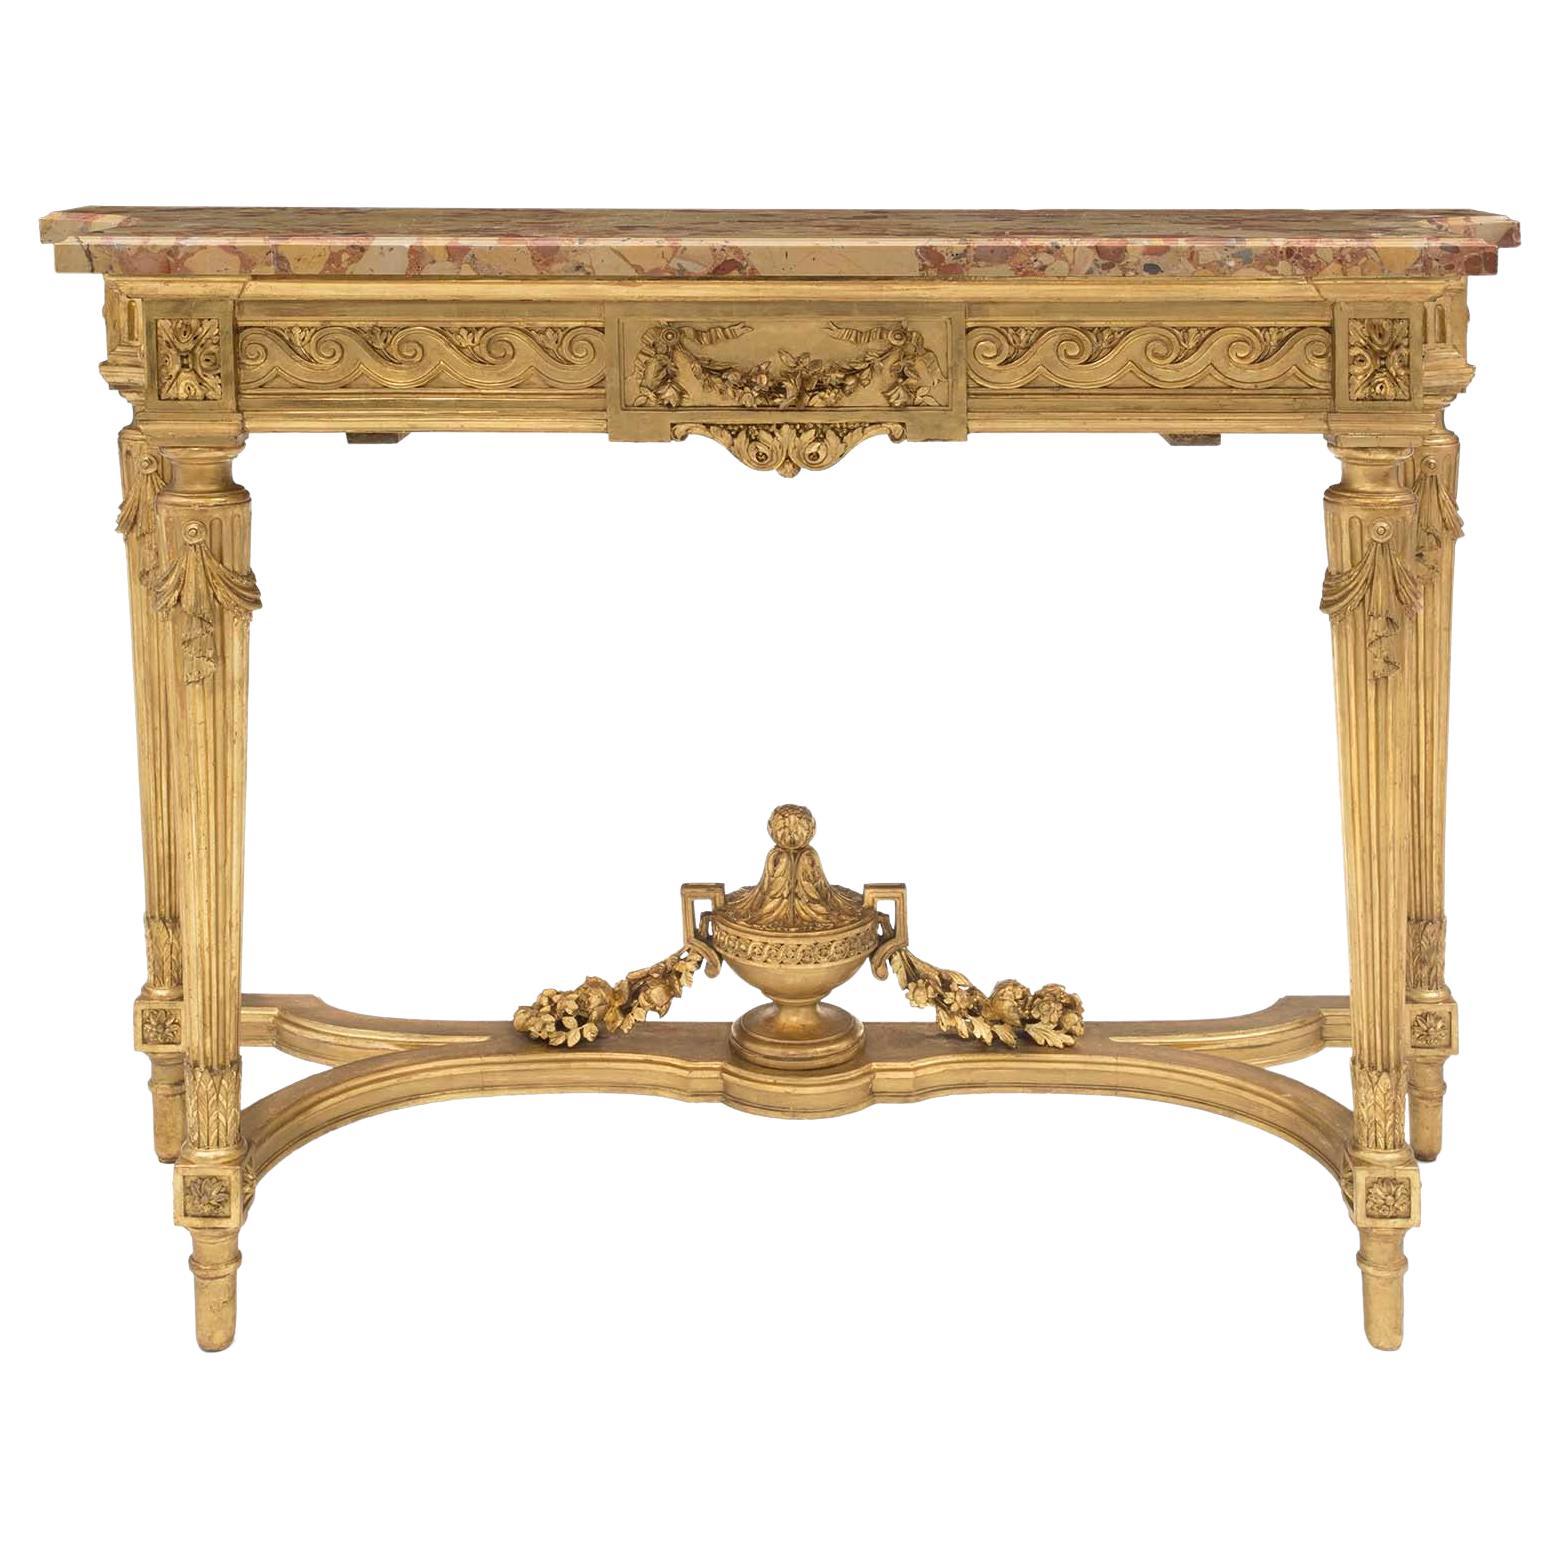 French 19th Century Louis XVI Style Giltwood and Marble Freestanding Console For Sale 7